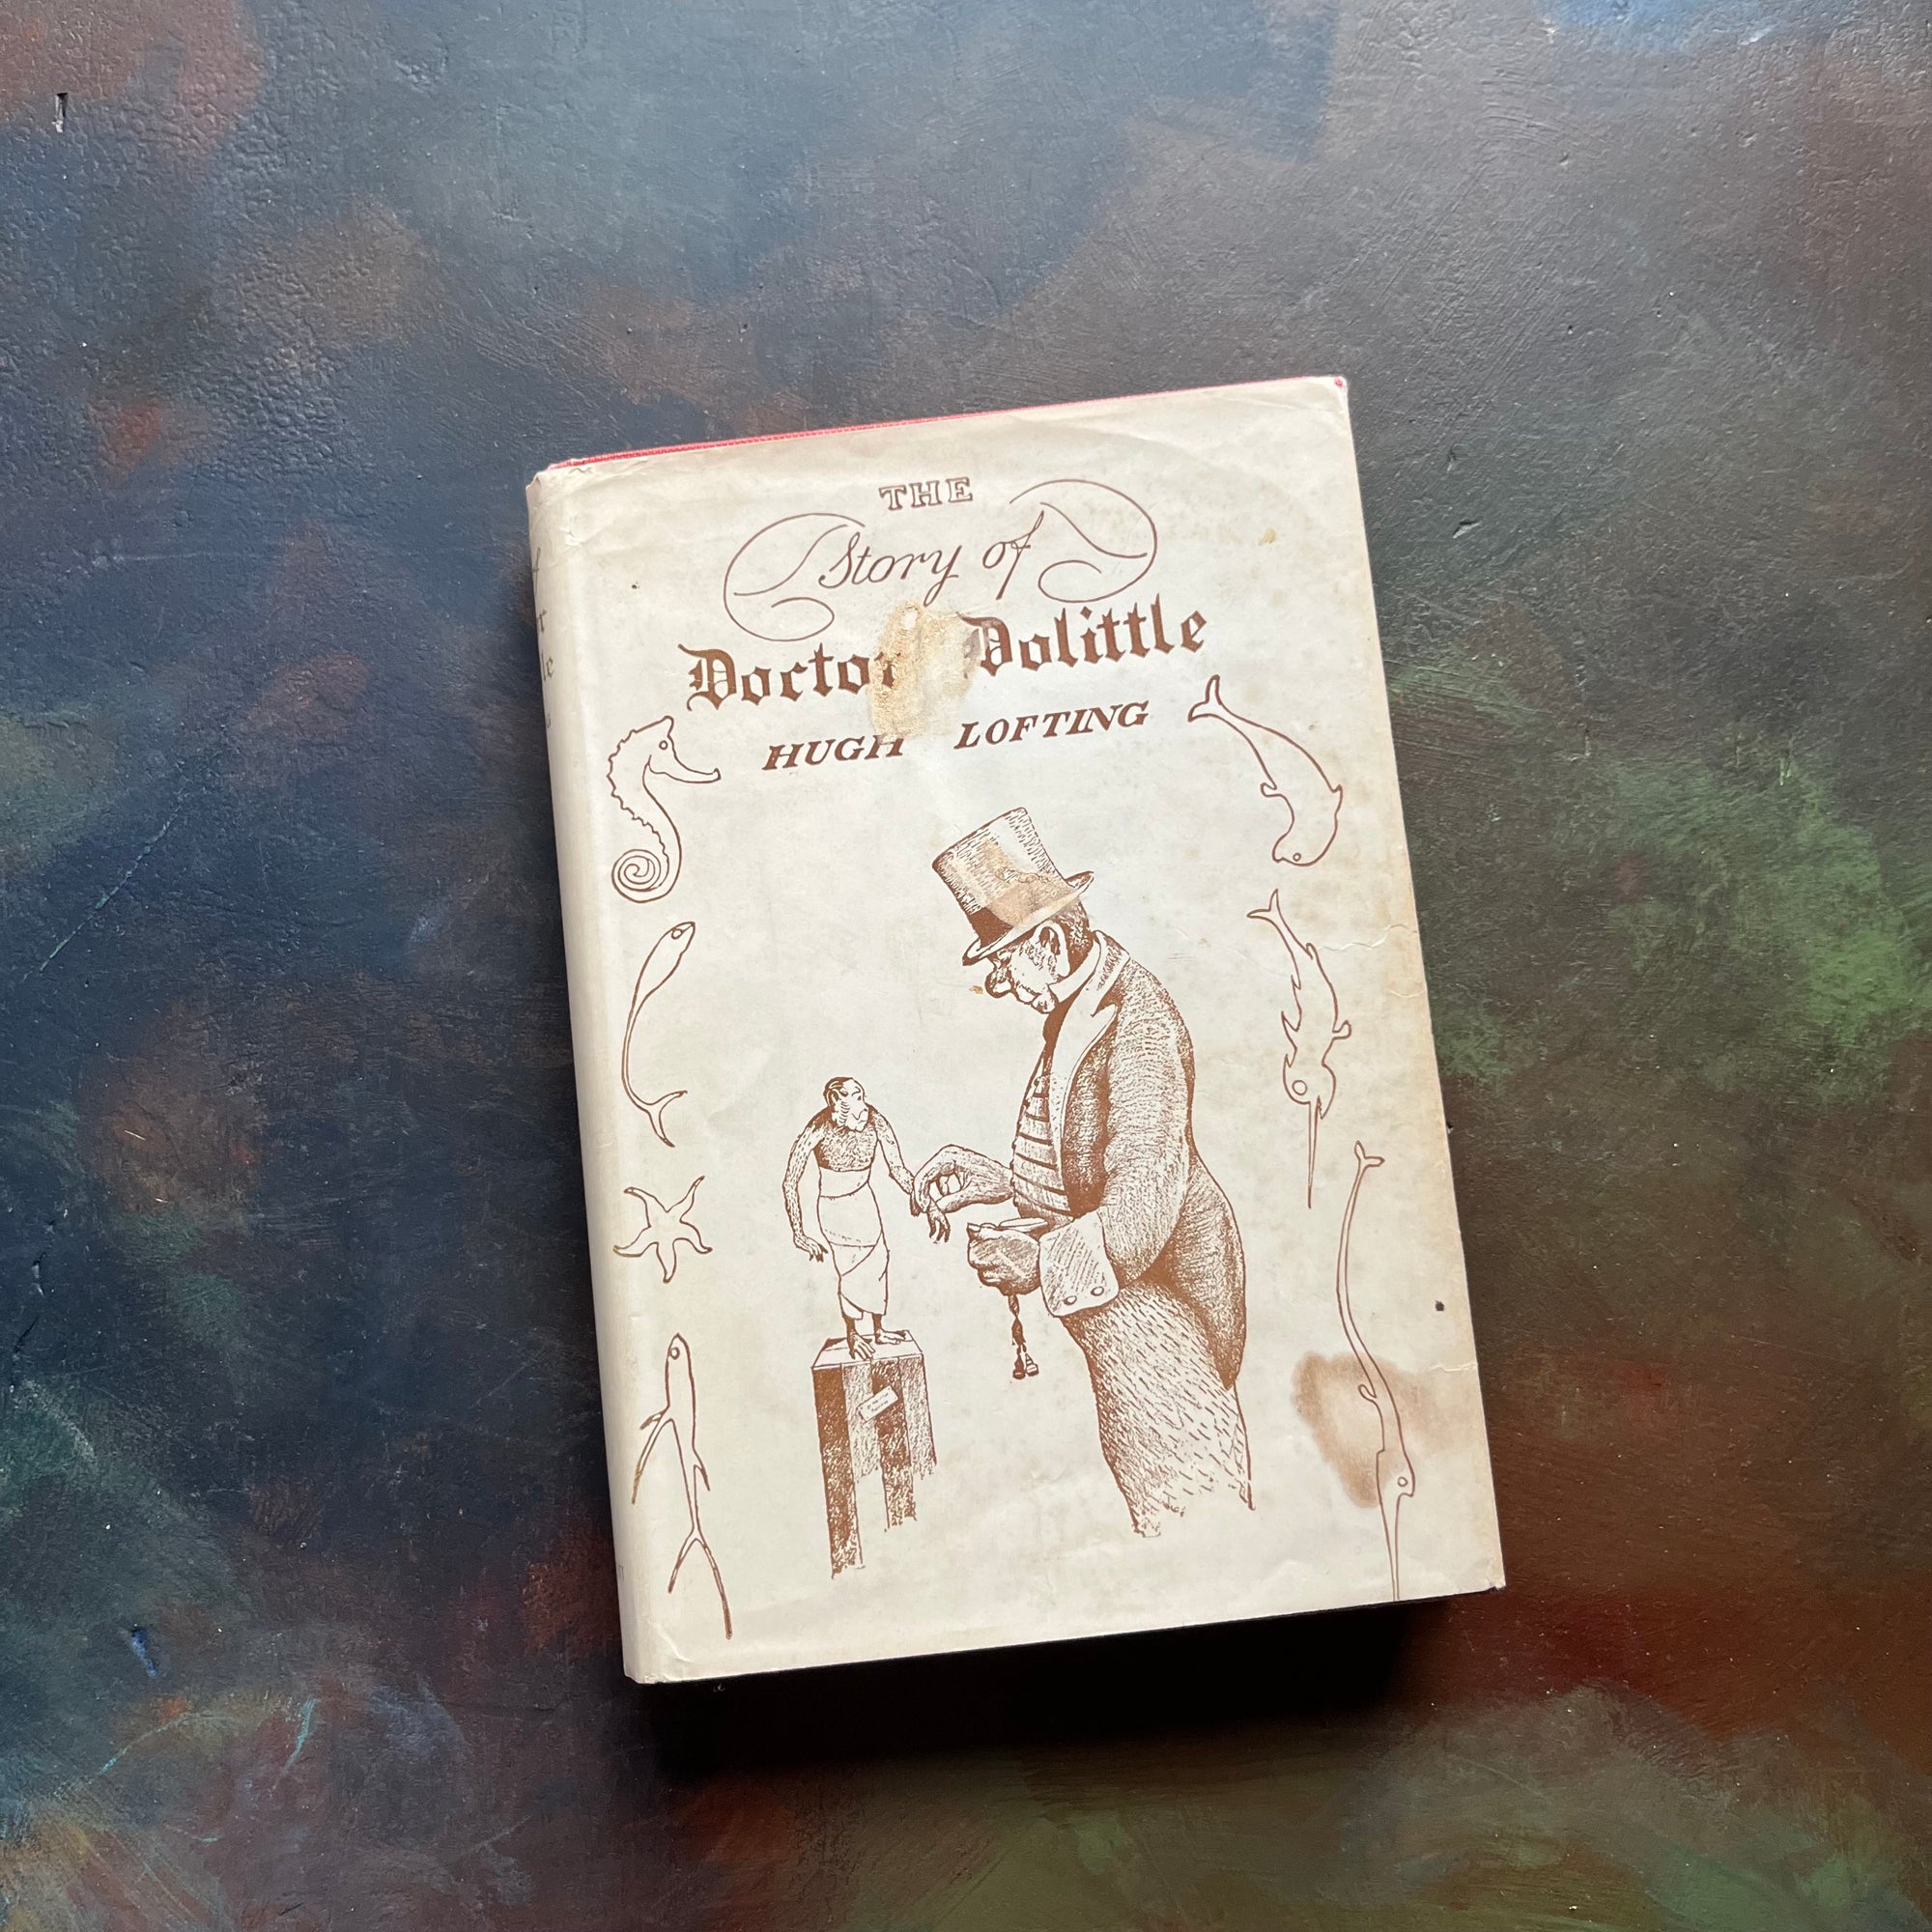 Doctor Dolittle written & illustrated by Hugh Lofting-1948 Edition-vintage children's chapter book-view of the dust jacket's front cover